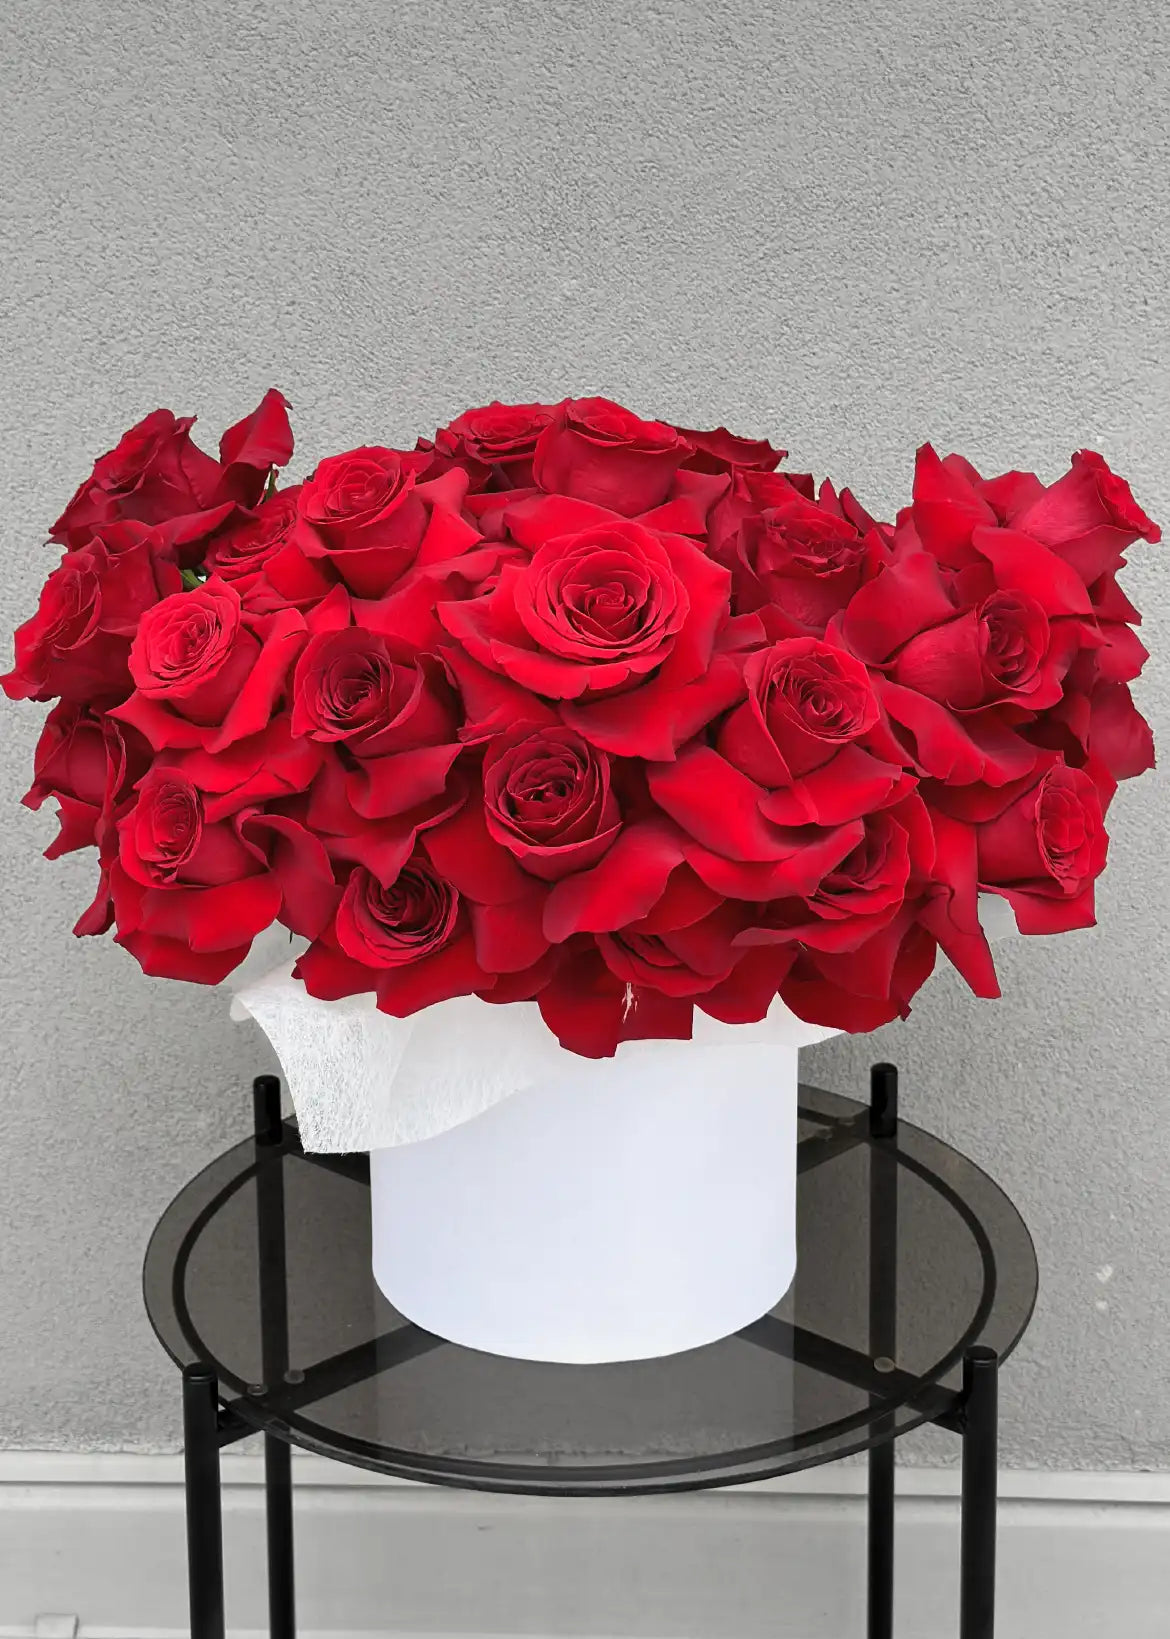 NO. 105. Rouge Romance (red roses)